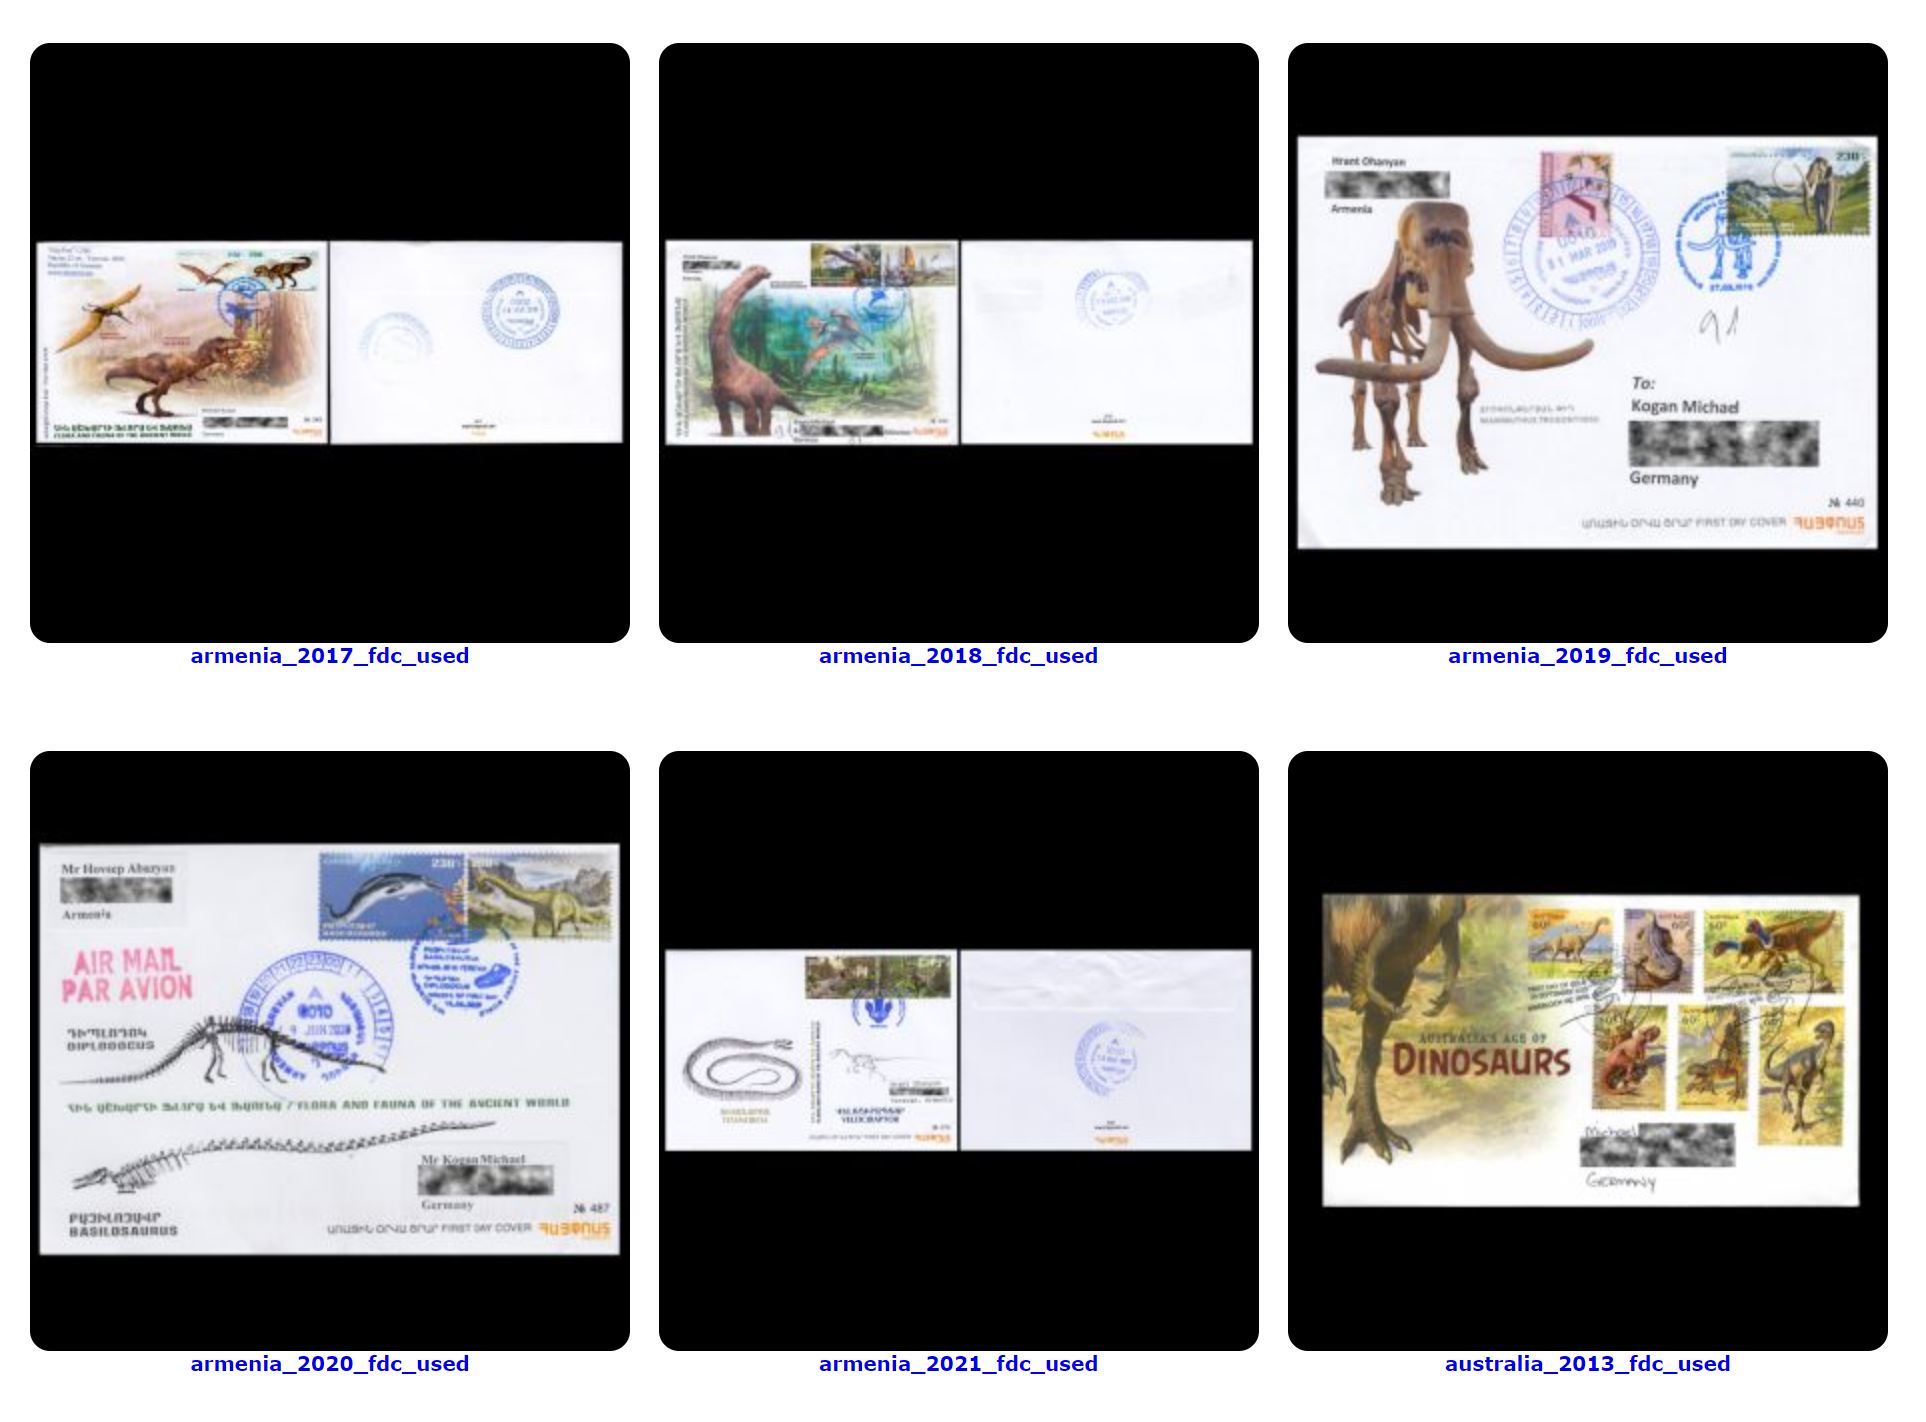 Gallery of Paleontology and Paleanthropology related FDC covers.